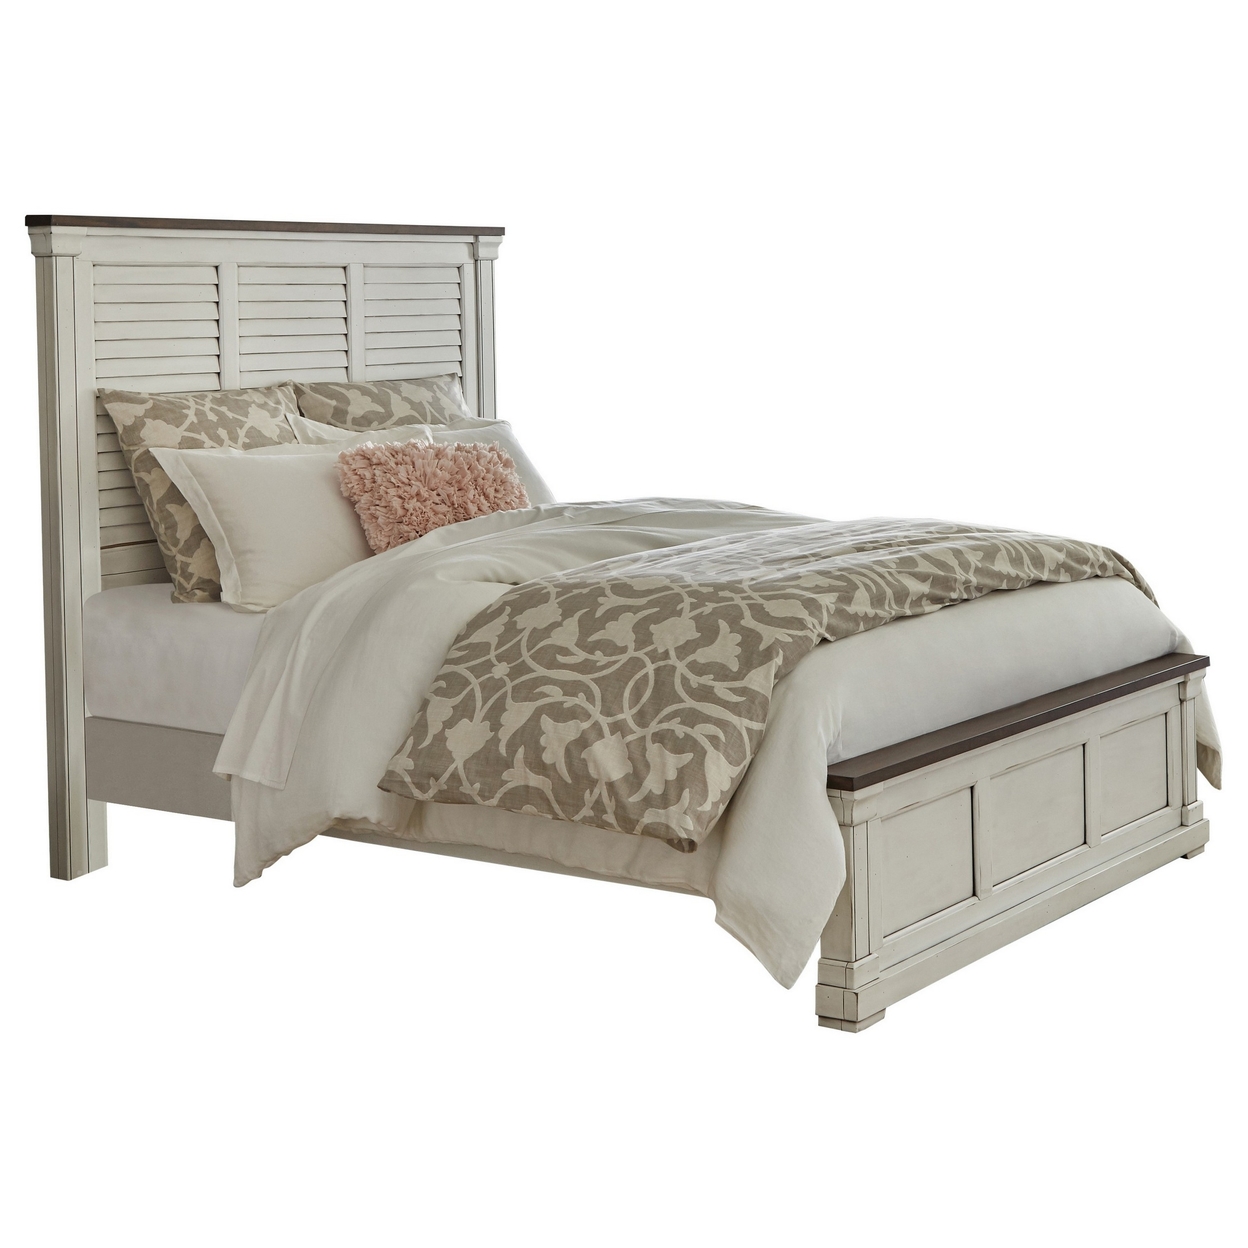 Ola Queen Panel Bed, Shutter Style Headboard, Molded Trim, White And Brown- Saltoro Sherpi